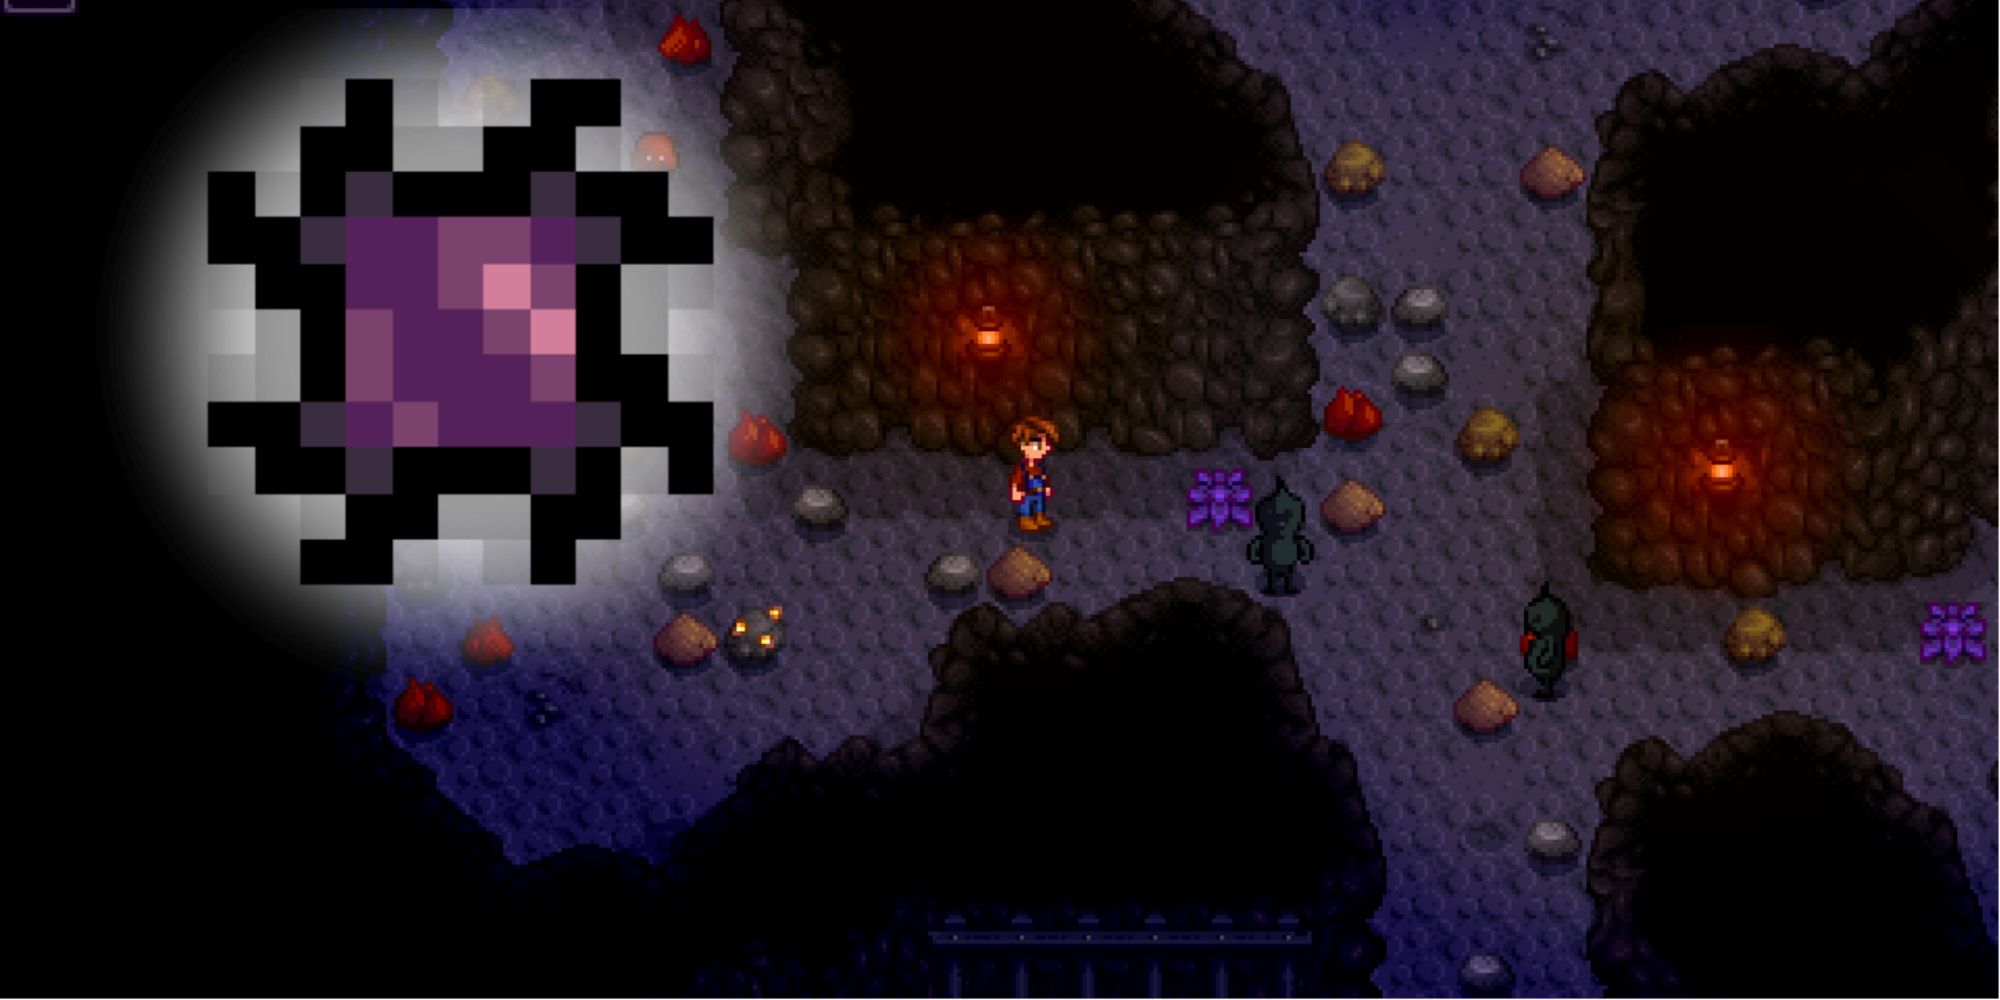 Two Shadow Brutes stare at the default player in the Mines. A glowing Void Essence hover in the top left.